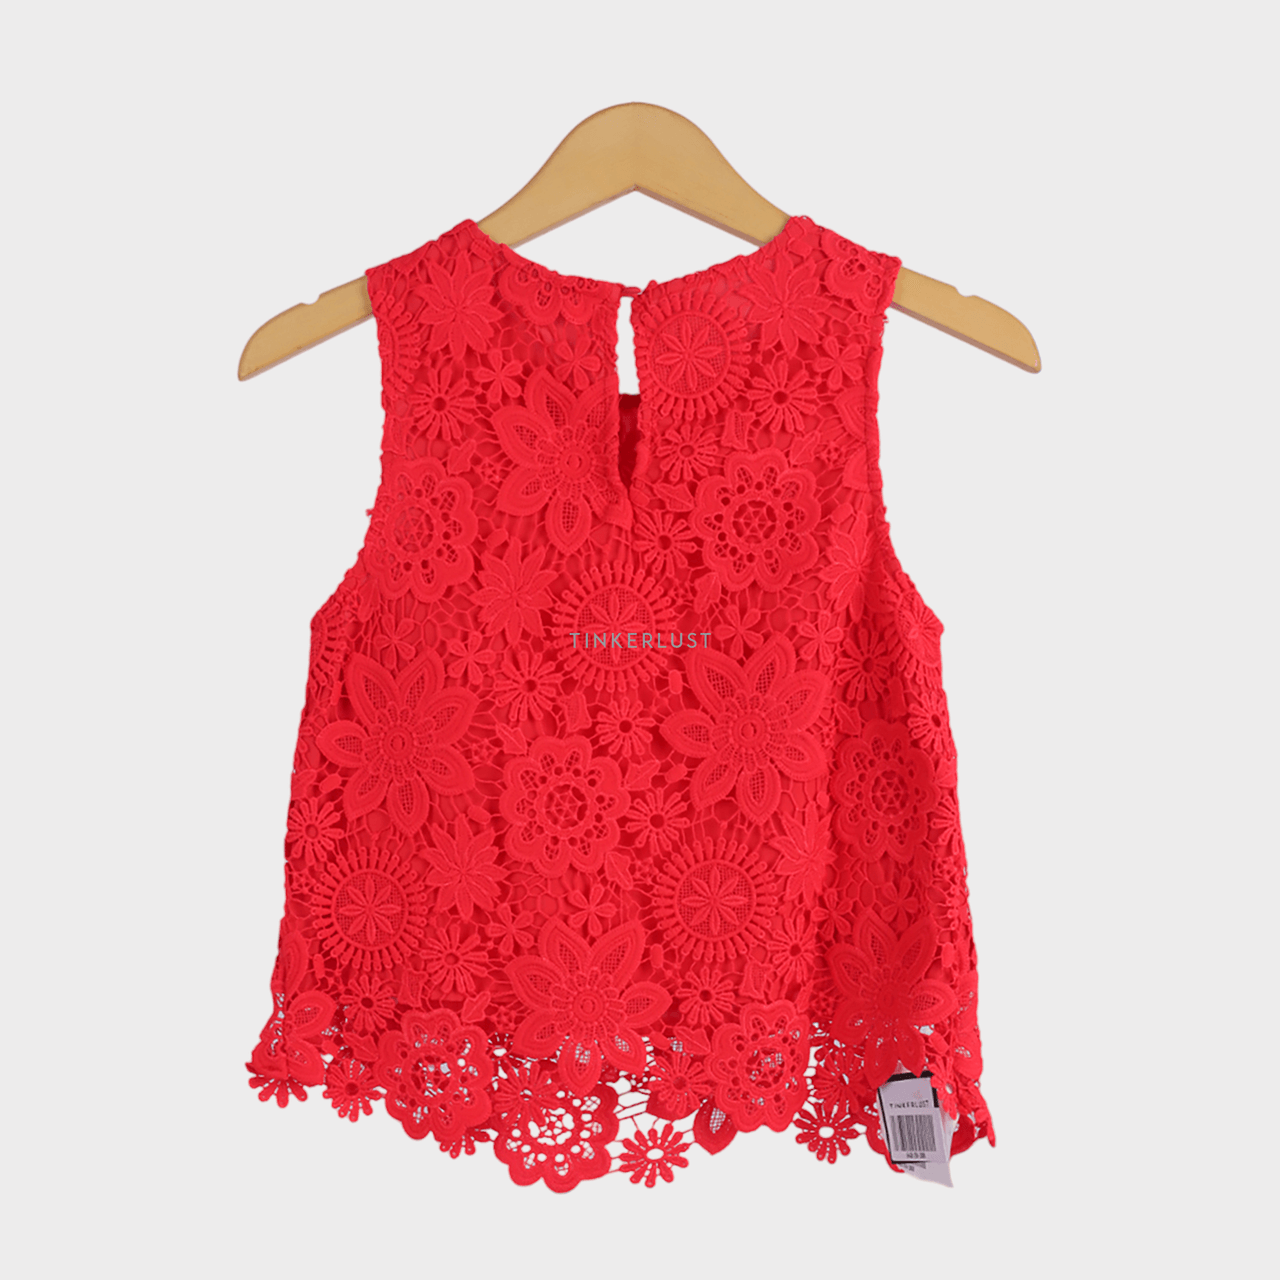 Topshop Red Sleeveless